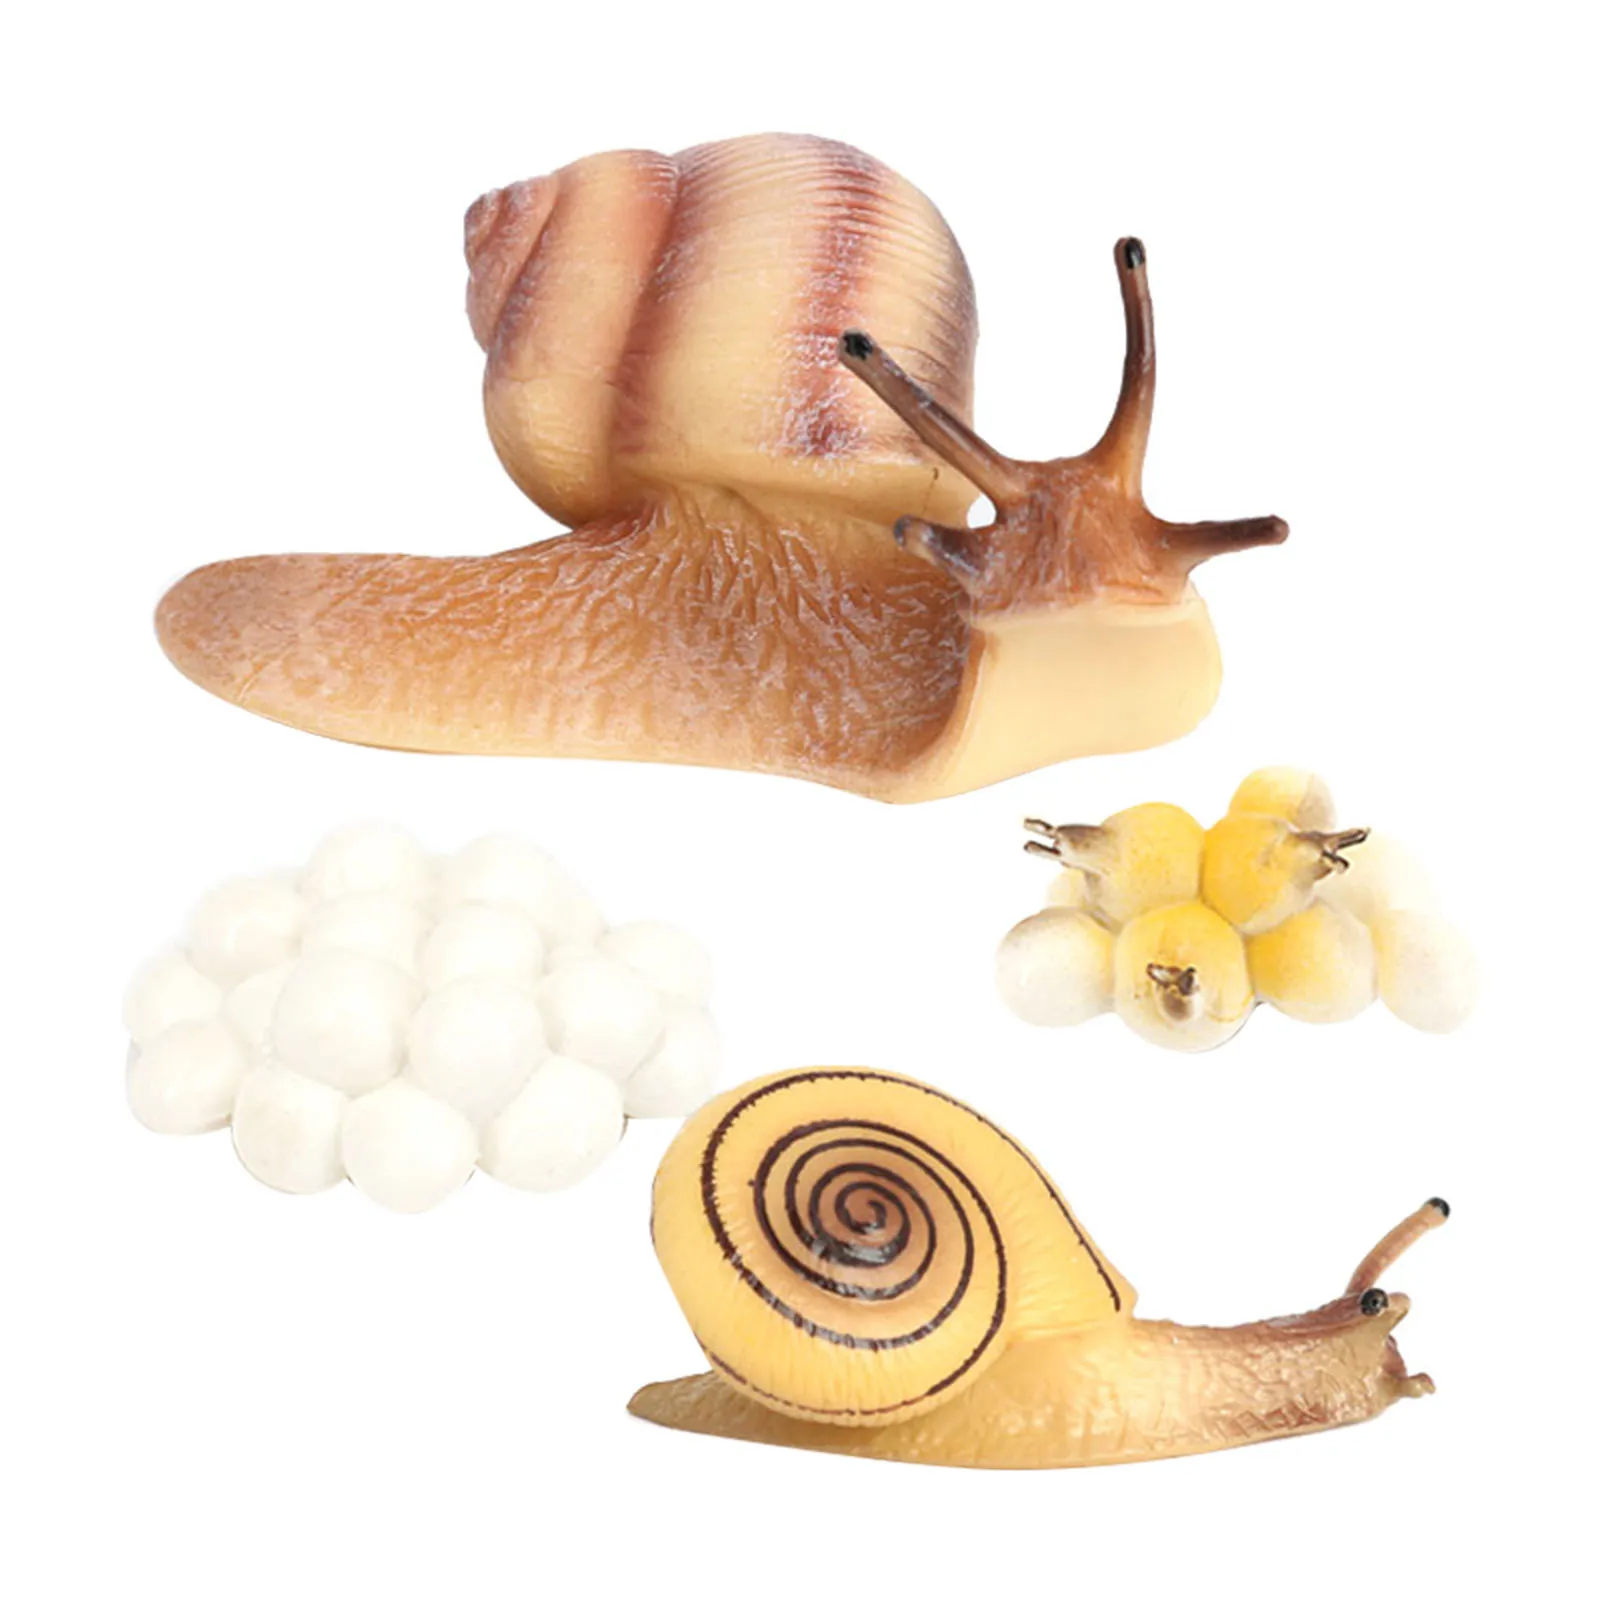 

Four Stage Nature Insect Growth Cycle Model Life Cycle of Snail Biology Toys